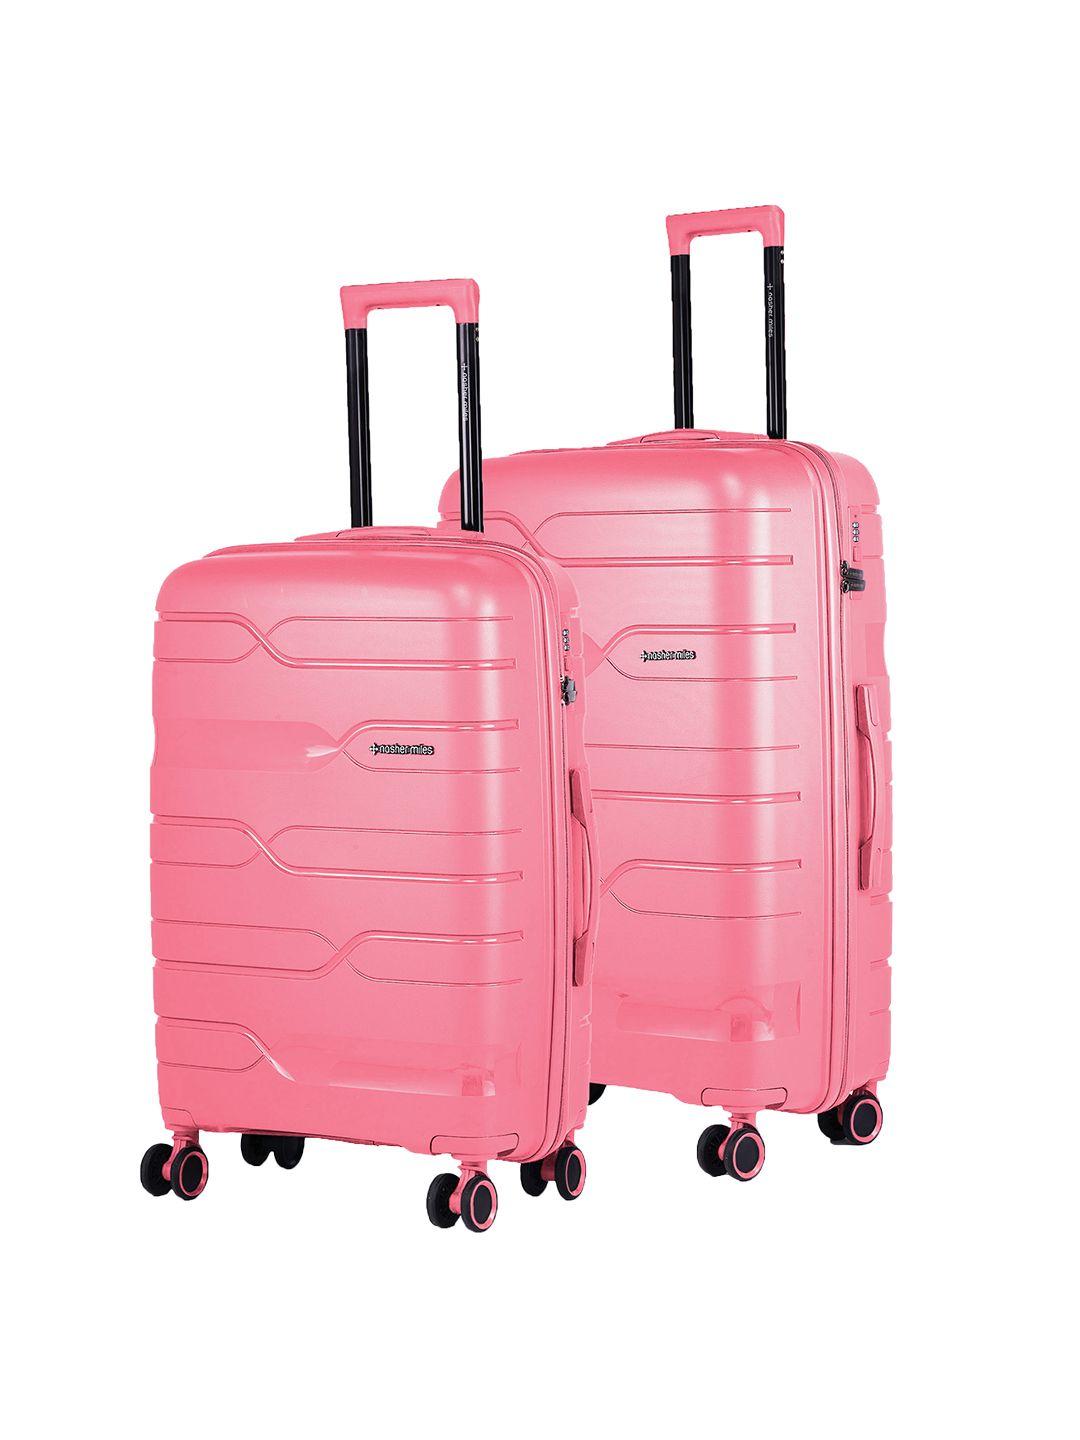 nasher miles set of 2 pink-colored textured hard-sided trolley suitcases